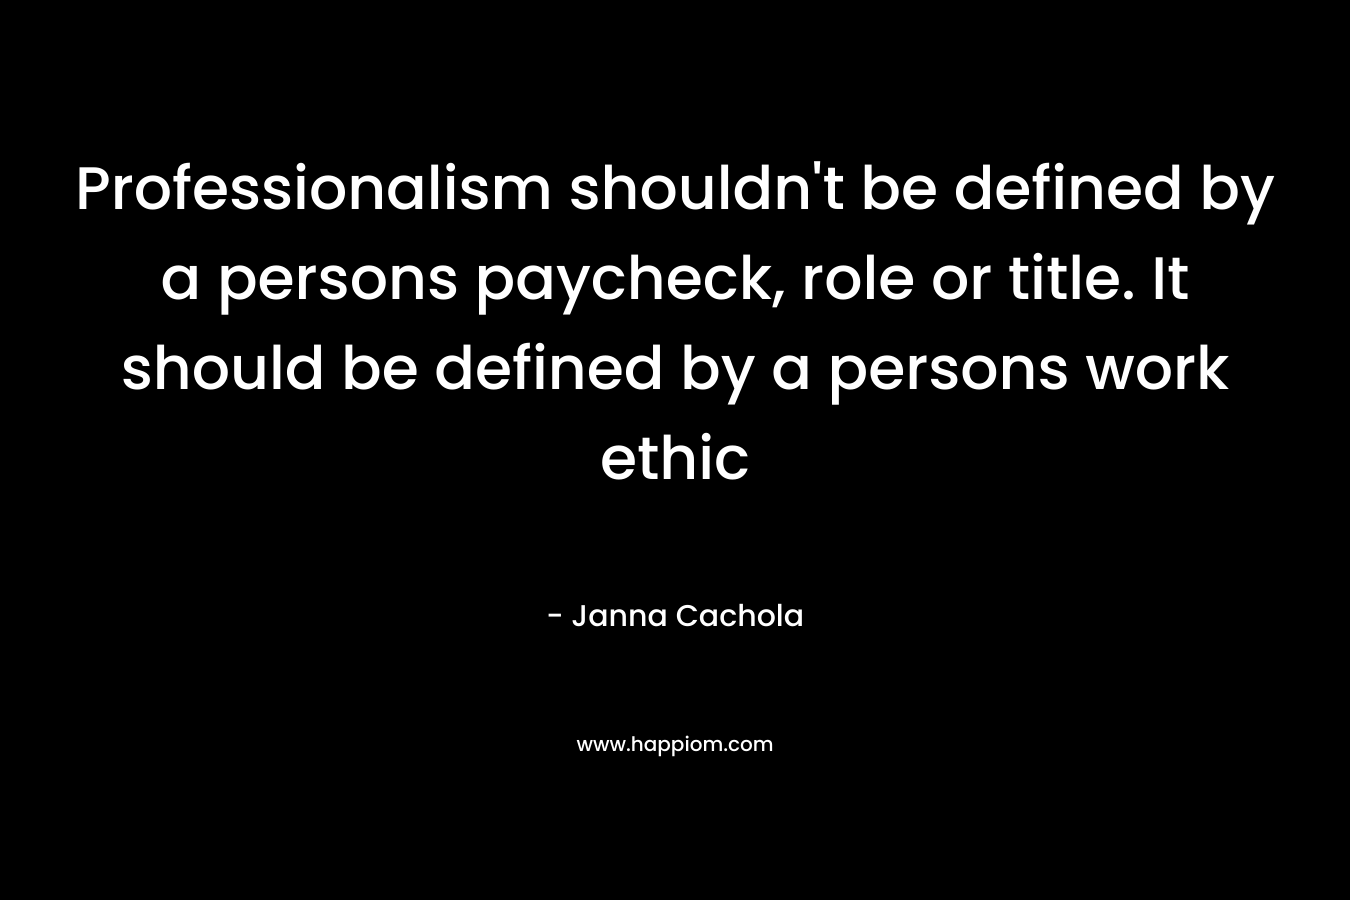 Professionalism shouldn't be defined by a persons paycheck, role or title. It should be defined by a persons work ethic